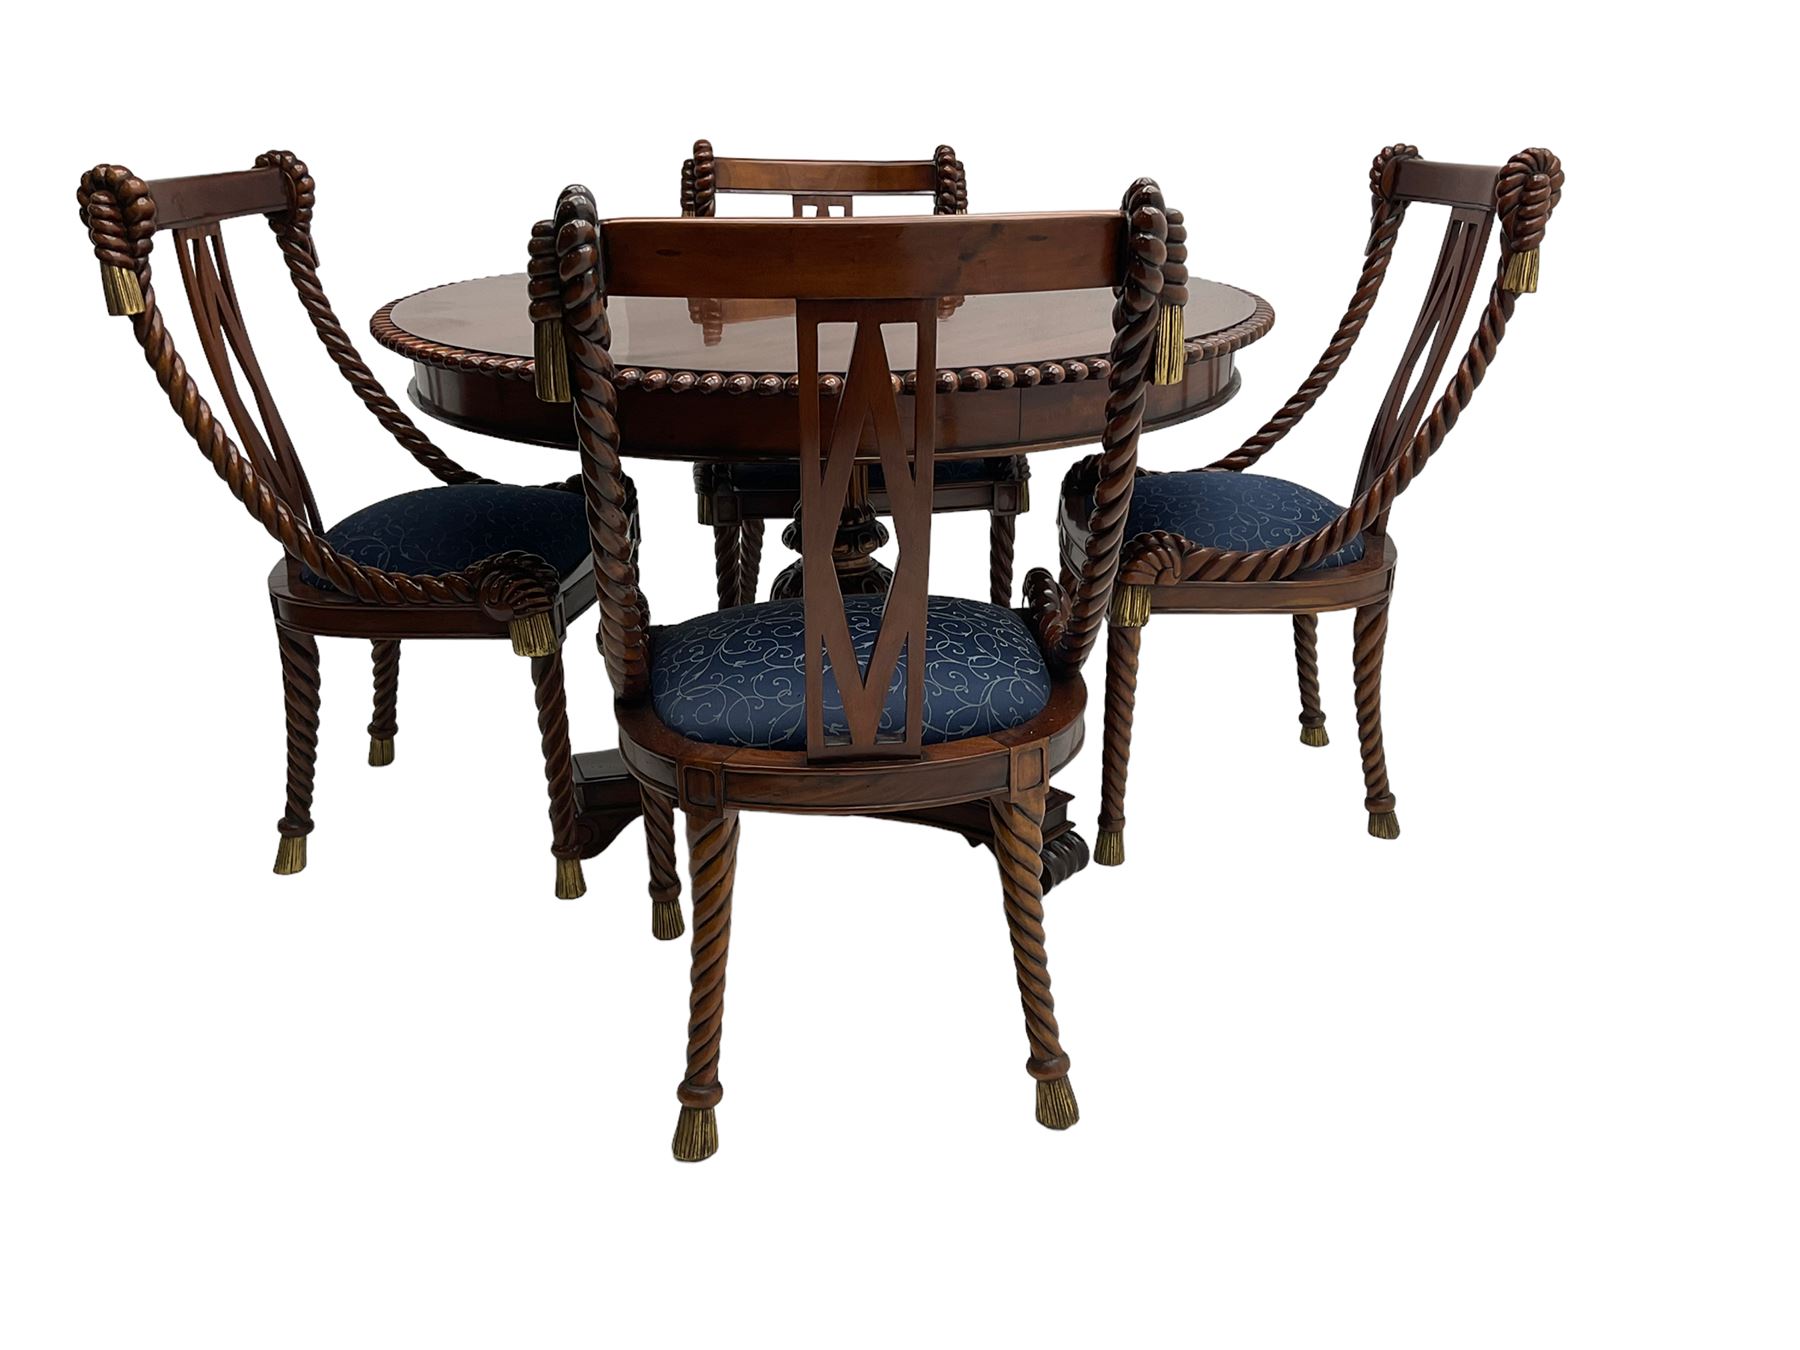 Regency style dining set - the table with circular tilt-top on turned and carved column - Image 3 of 6